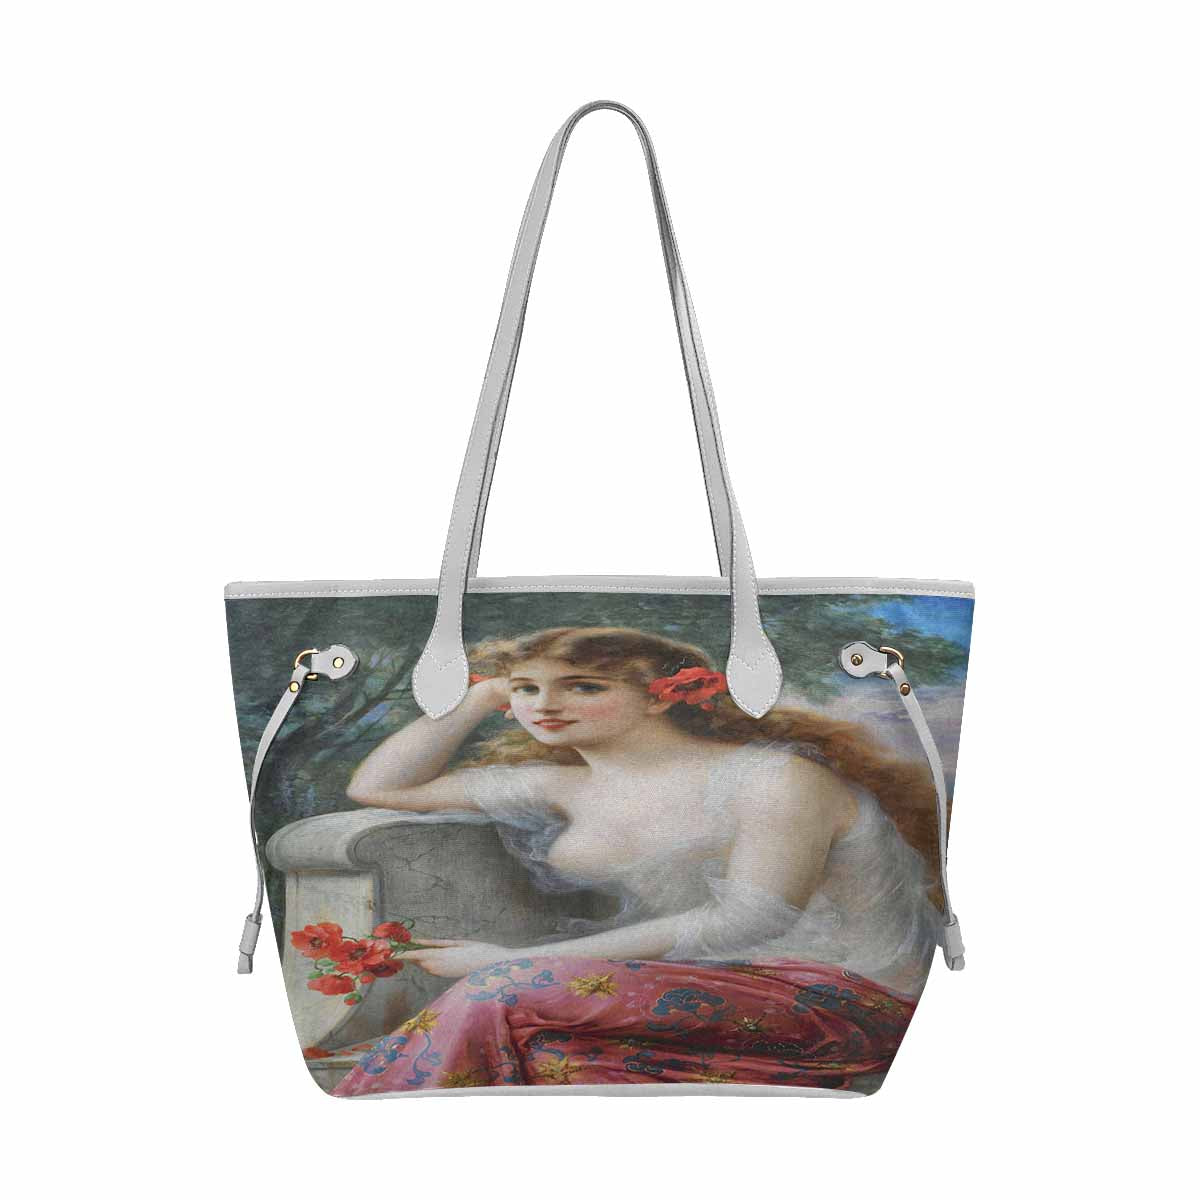 Victorian Lady Design Handbag, Model 1695361, Young Beauty With Poppies, WHITE TRIM